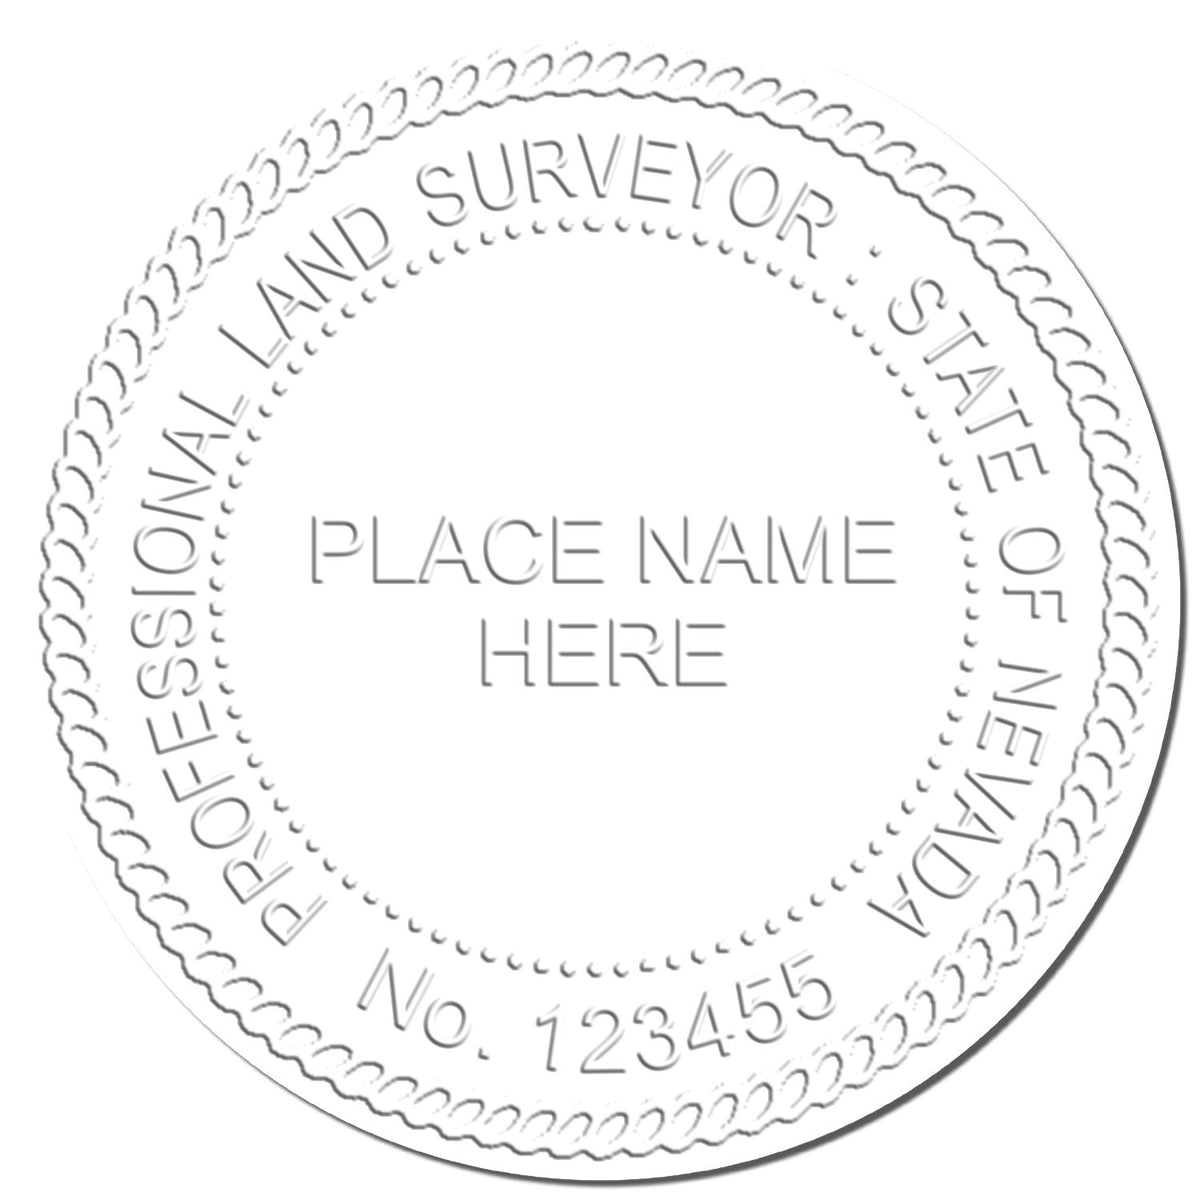 This paper is stamped with a sample imprint of the State of Nevada Soft Land Surveyor Embossing Seal, signifying its quality and reliability.